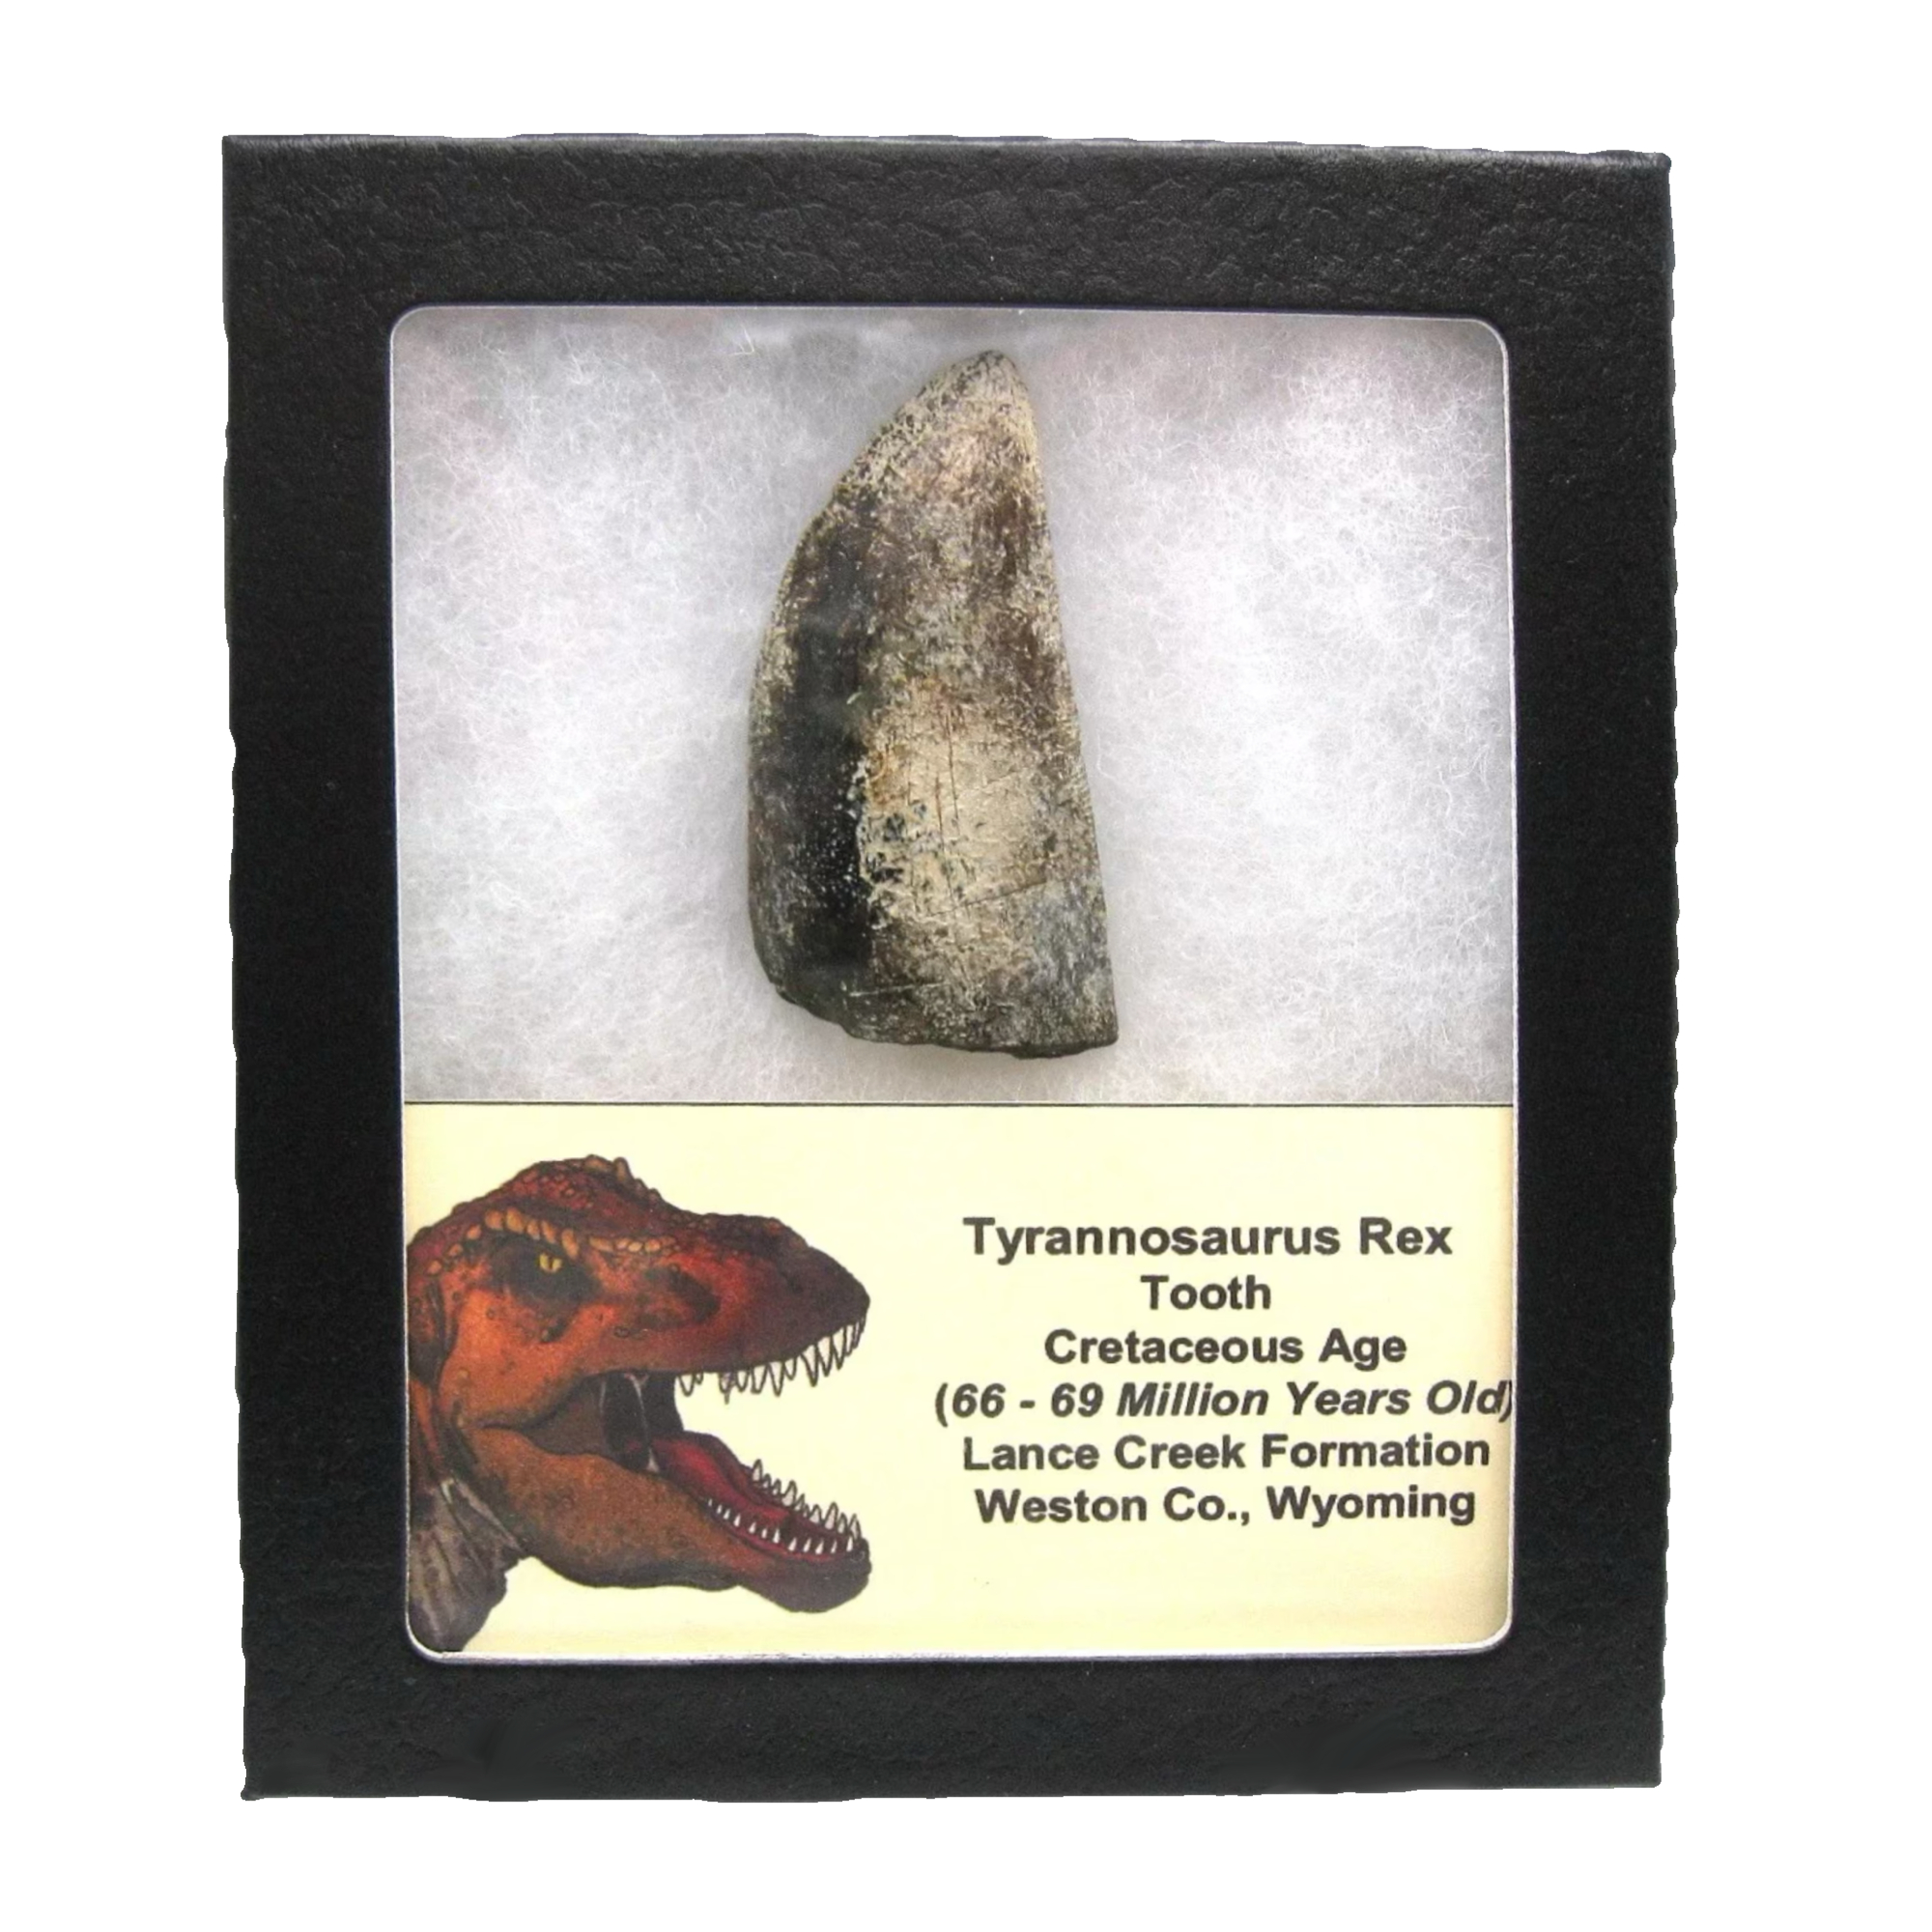 Trex tooth in a collector box. This genuine and rare fossil is from Wyoming